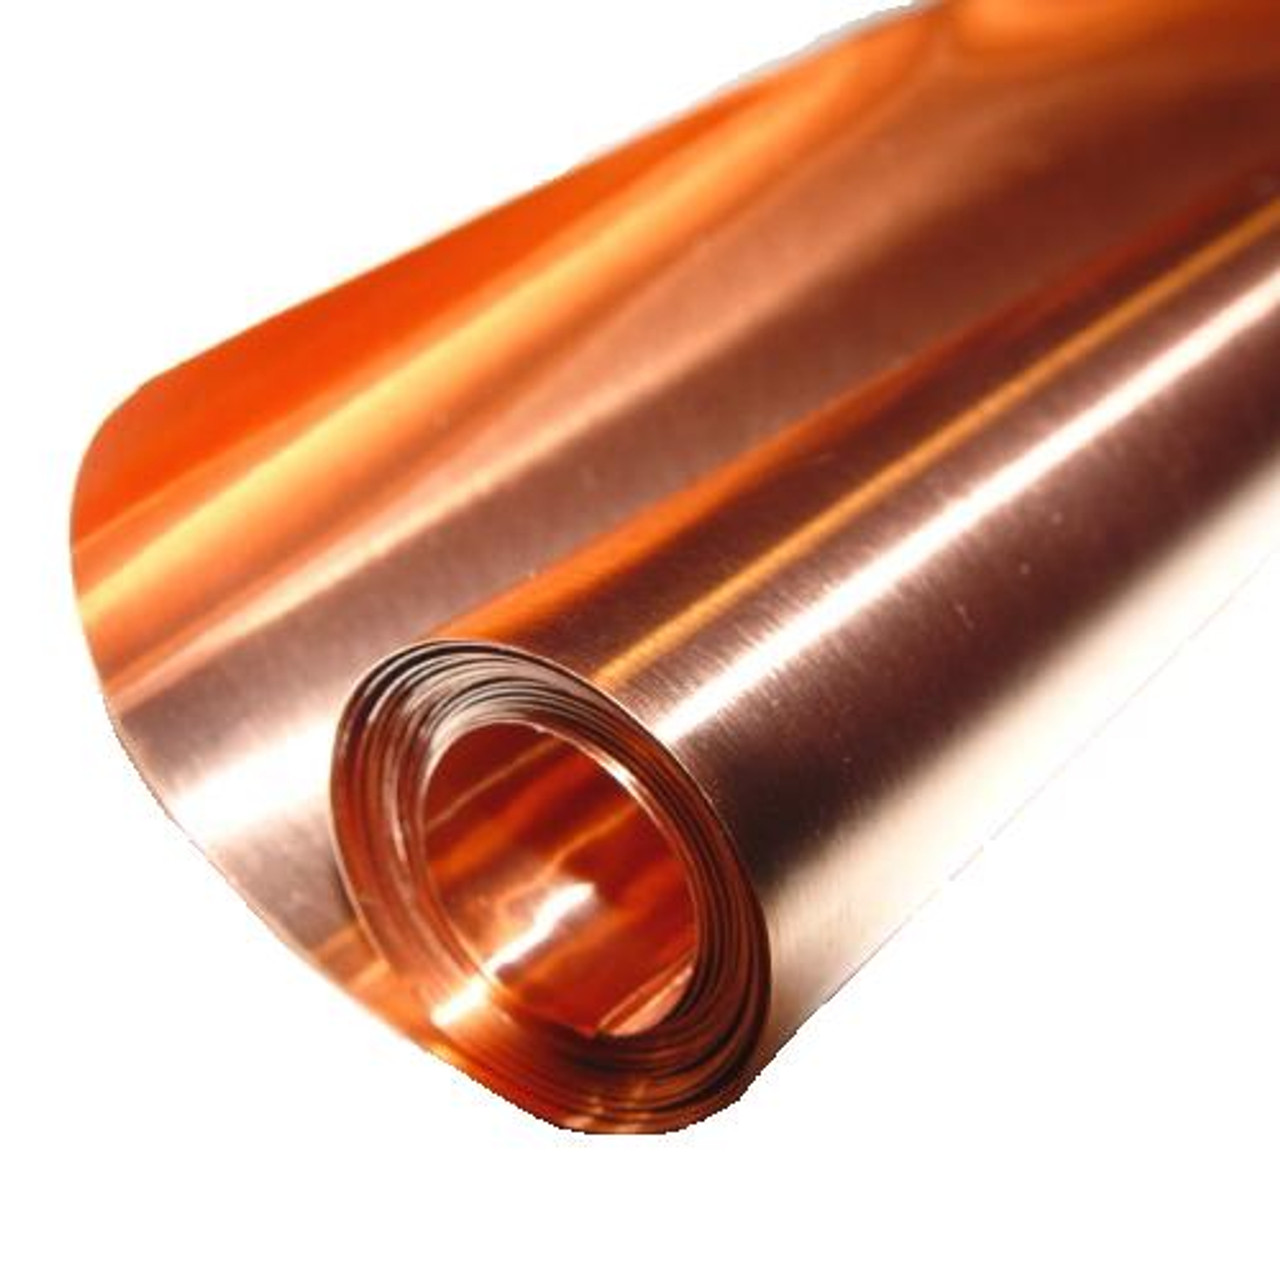 LVLOZ Sheet Metal, Plate Sheets for Crafts Art, Contact Paper Mounting  Plate, Thin Copper Sheet Metal (Size(mm) : 300 * 300, Thickness(mm) : 0.8)